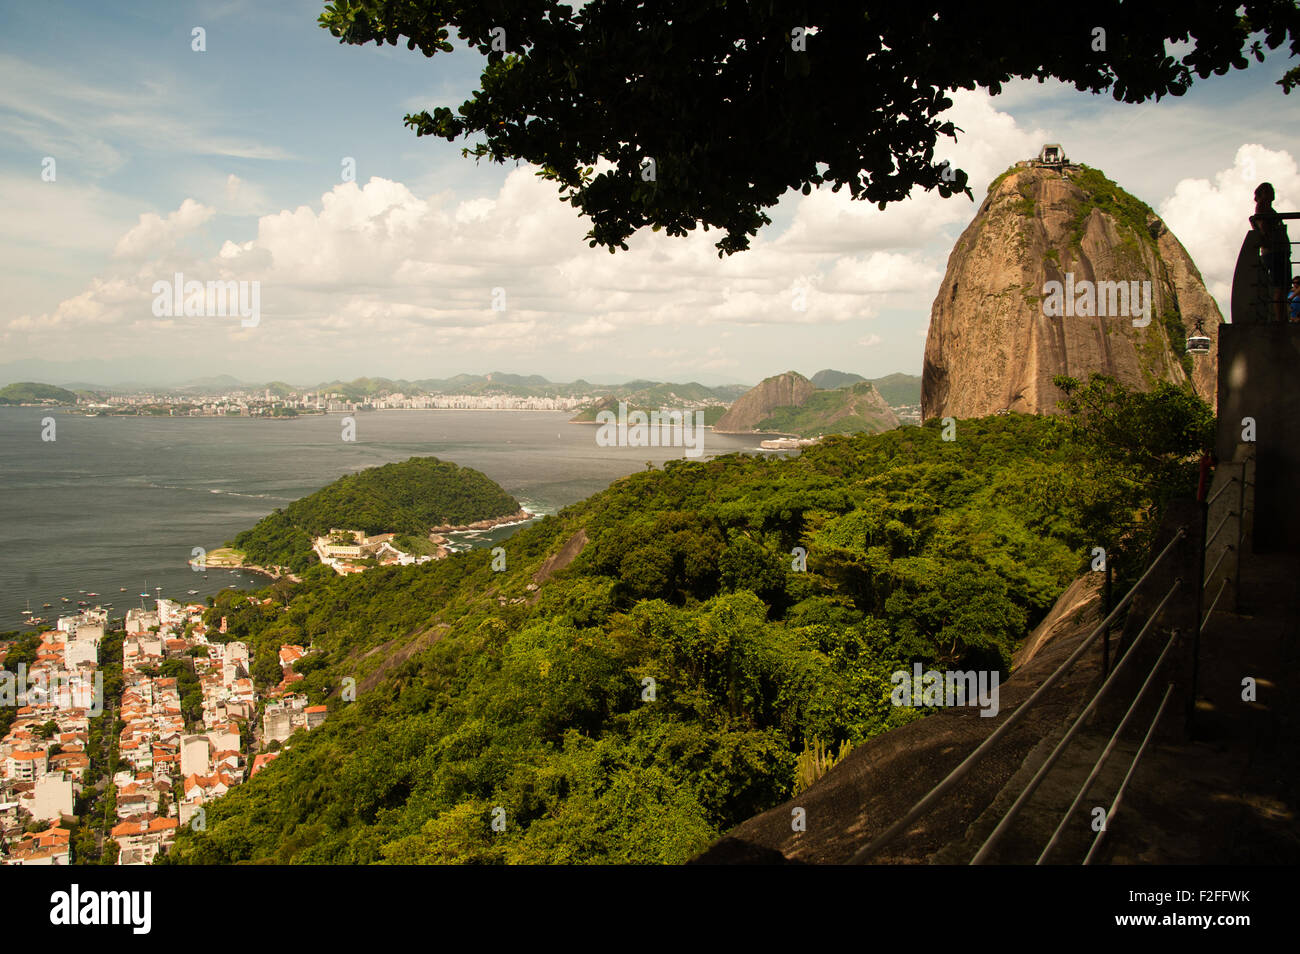 Scenic view of Sugar Loaf mountain with coastline of Rio de Janeiro city in background, Brazil. Stock Photo